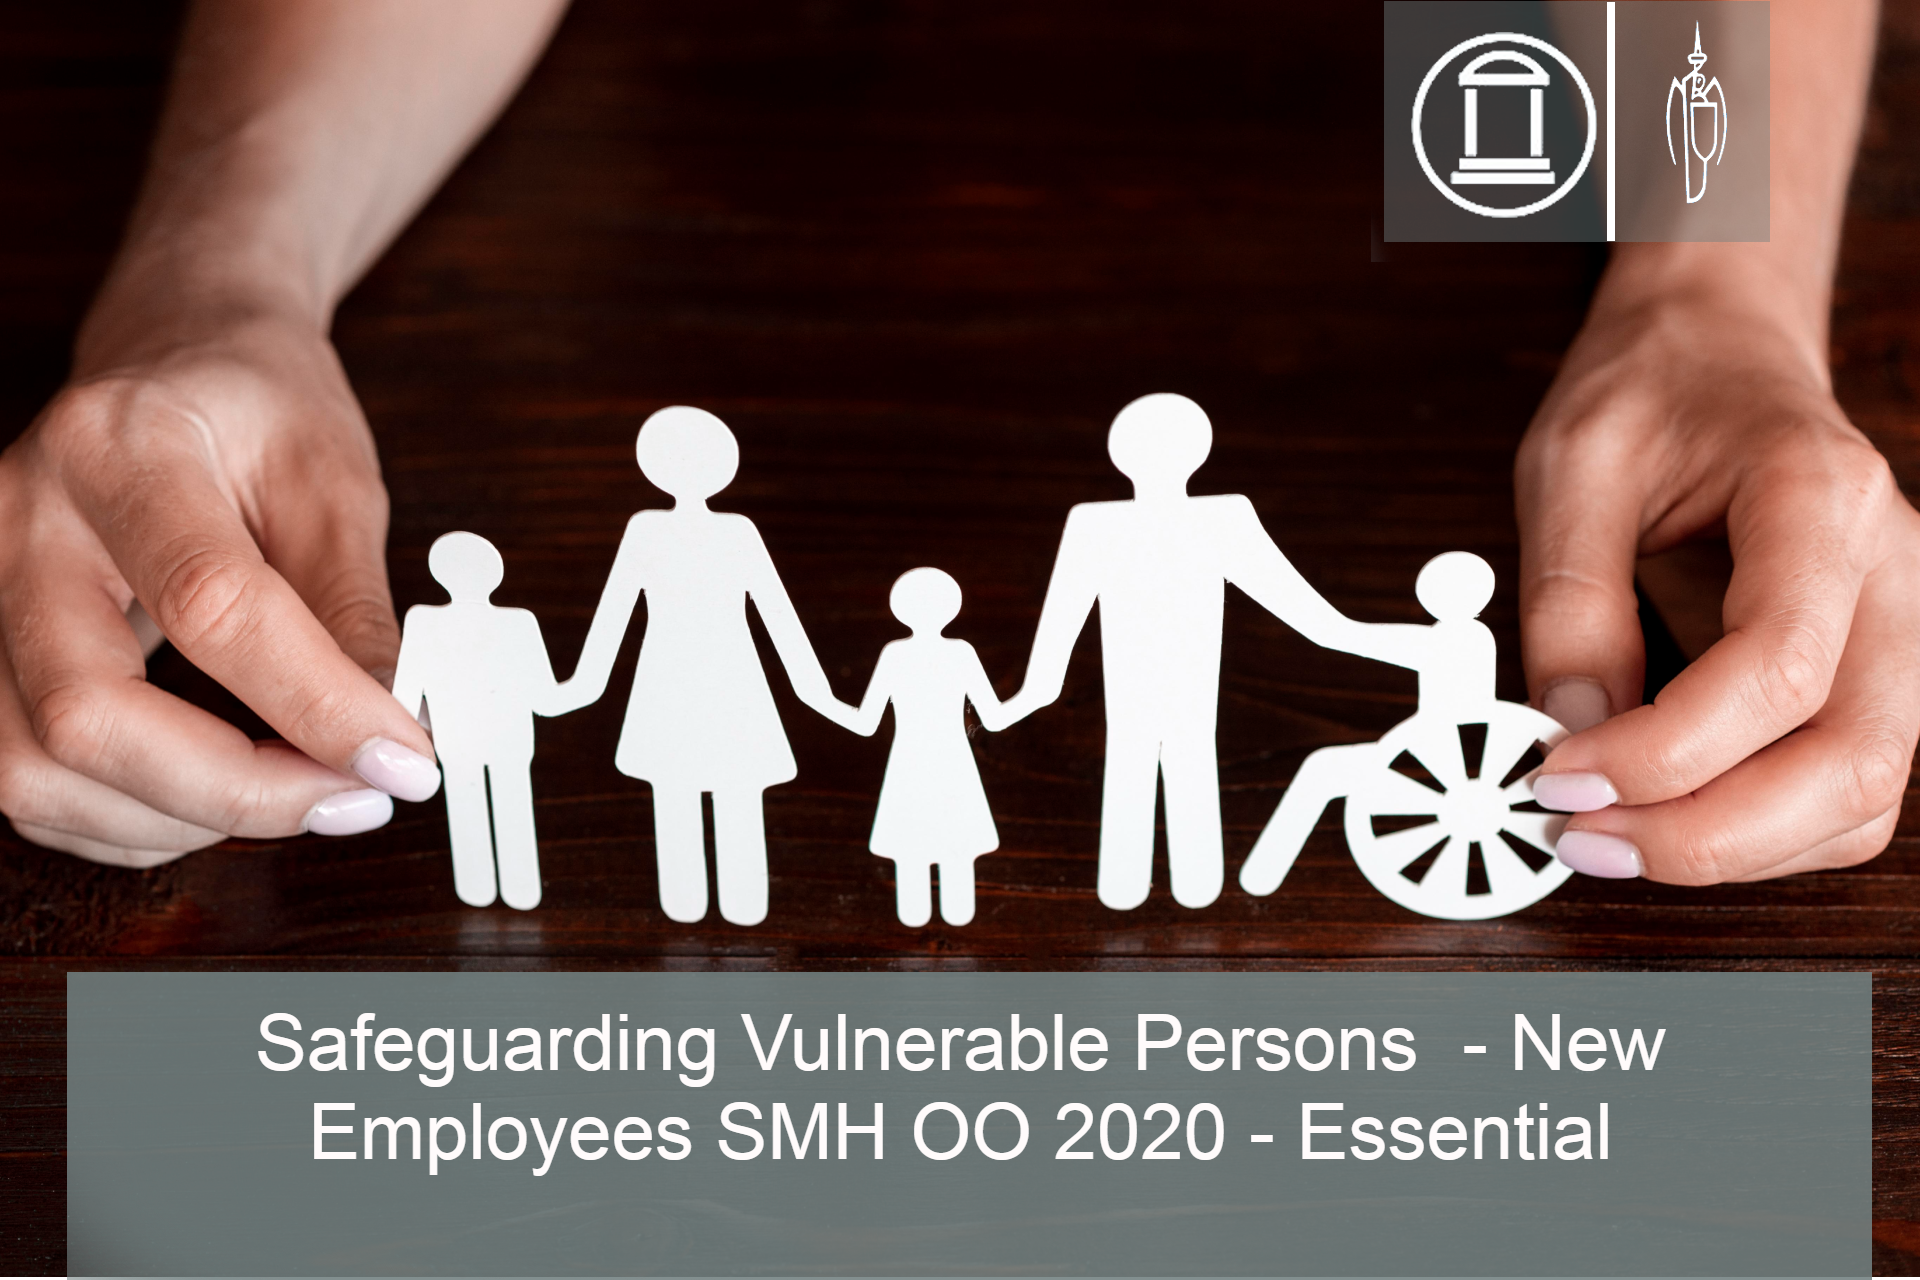 Safeguarding Vulnerable Persons  - New Employees SMH OO 2020 - Essential